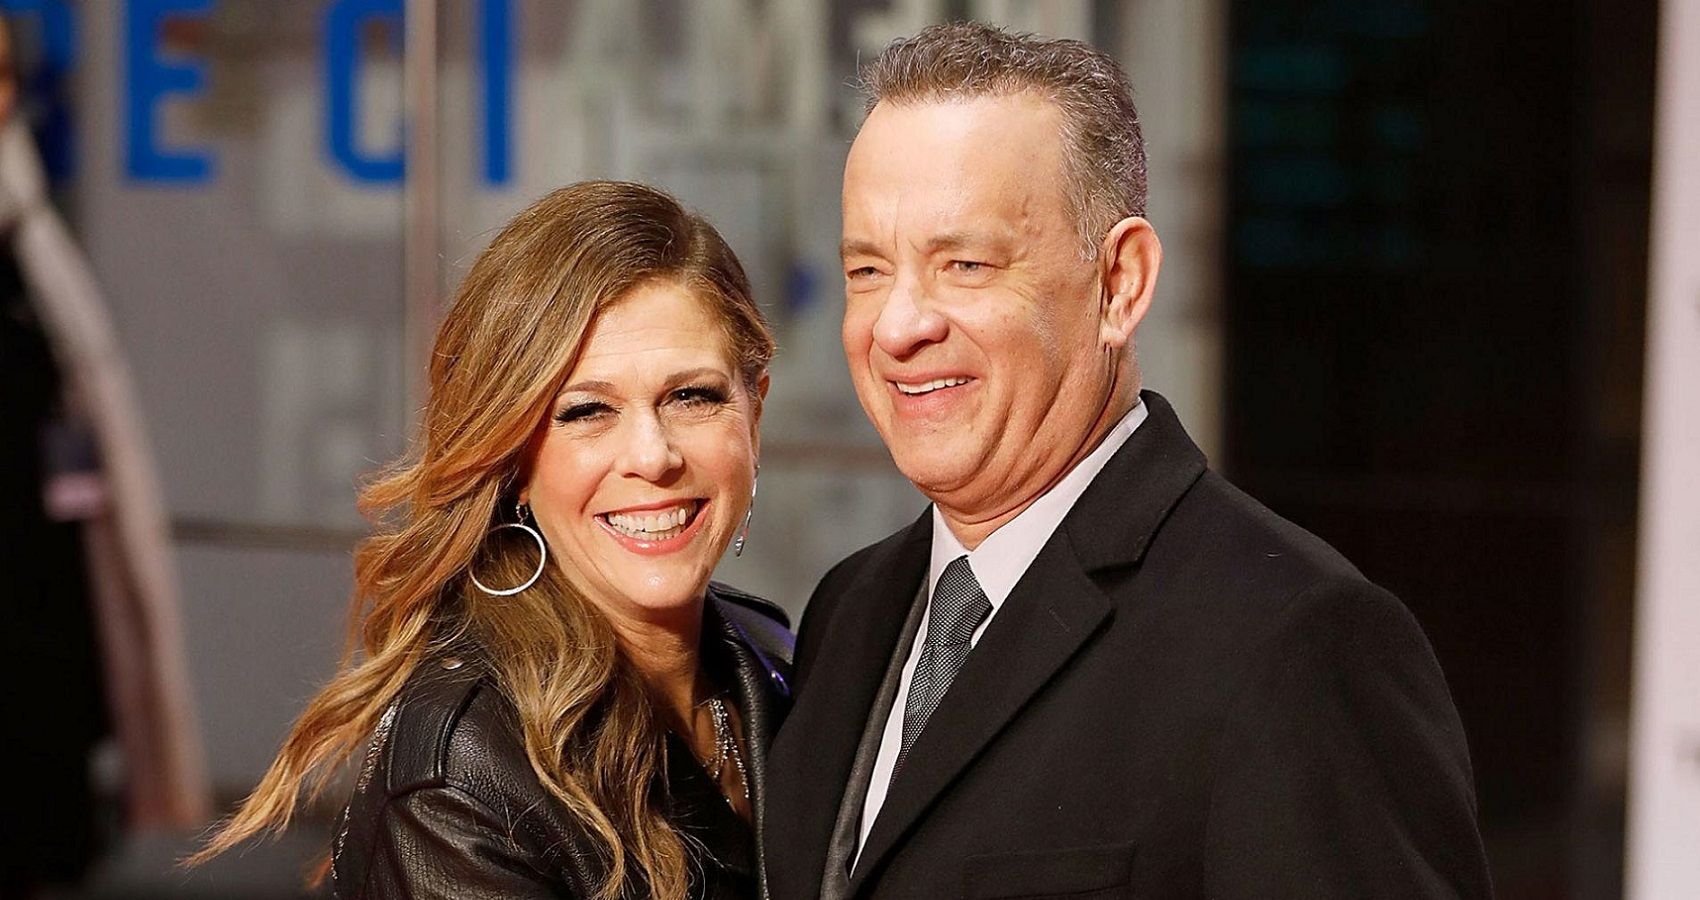 Tom Hanks And Rita Wilson Had A Surprising Connection Before They Even Met